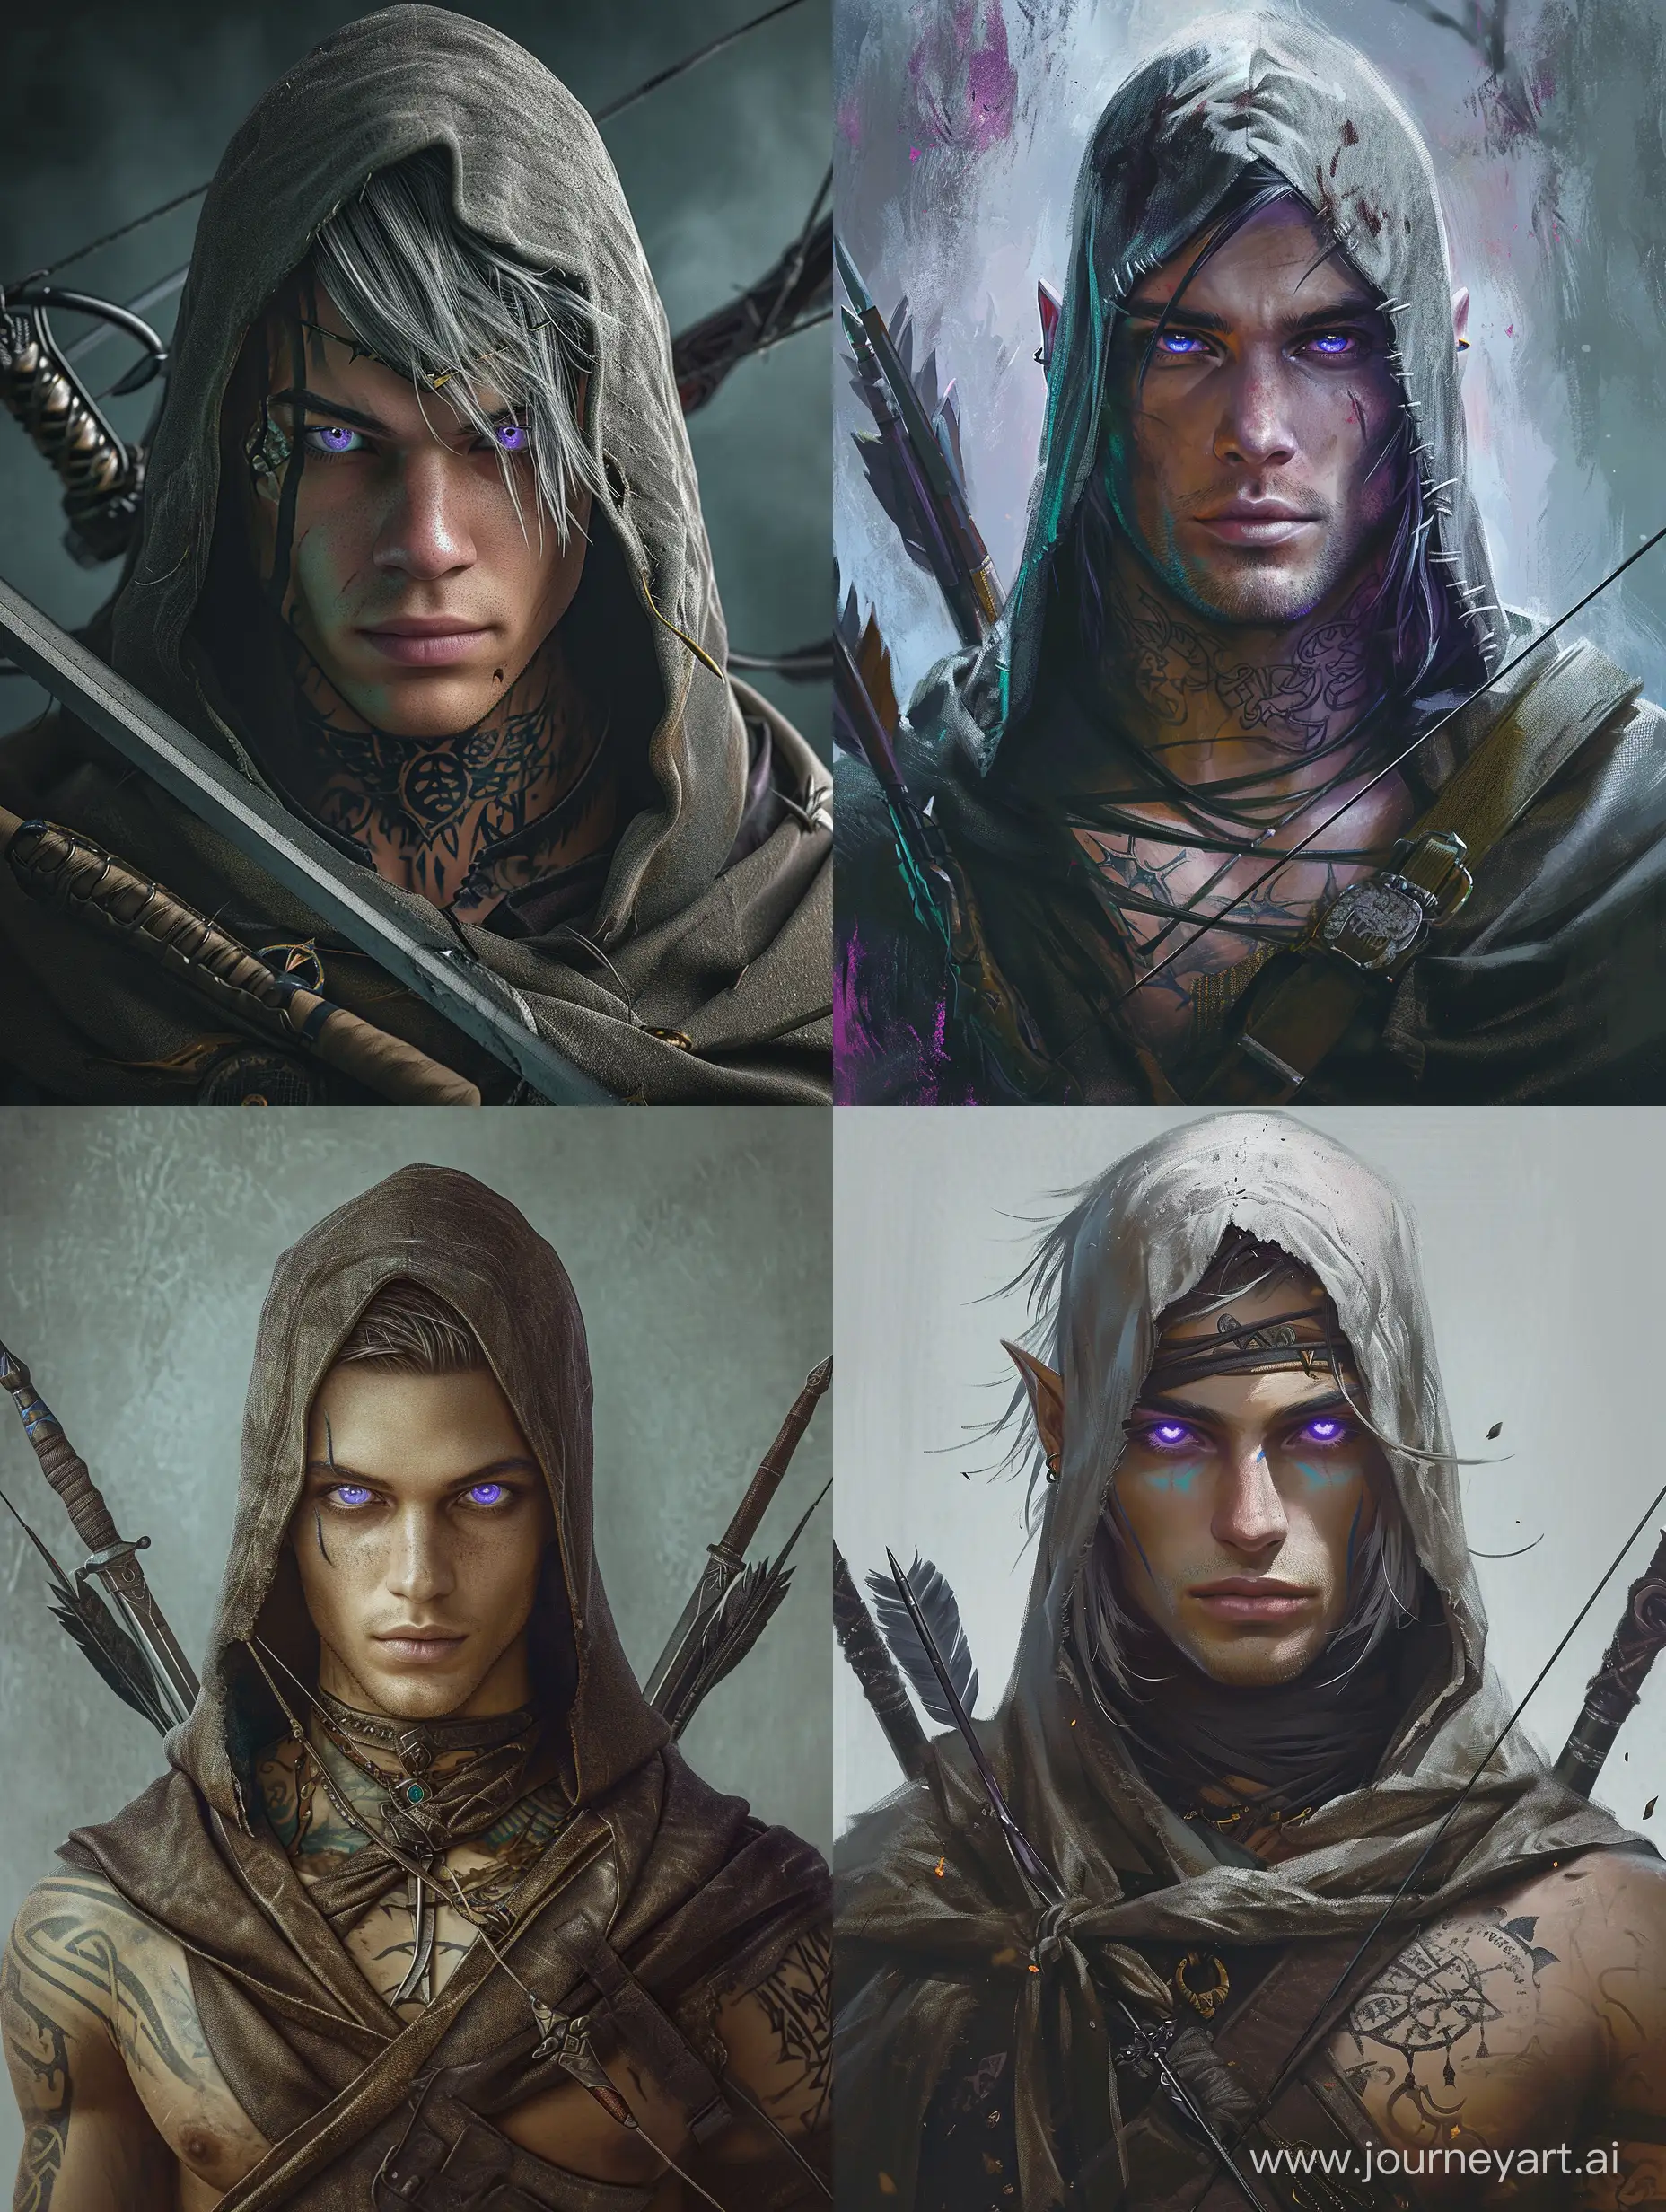 Mysterious-Young-Warrior-with-Twin-Swords-and-Bow-in-Dark-Fantasy-Realm